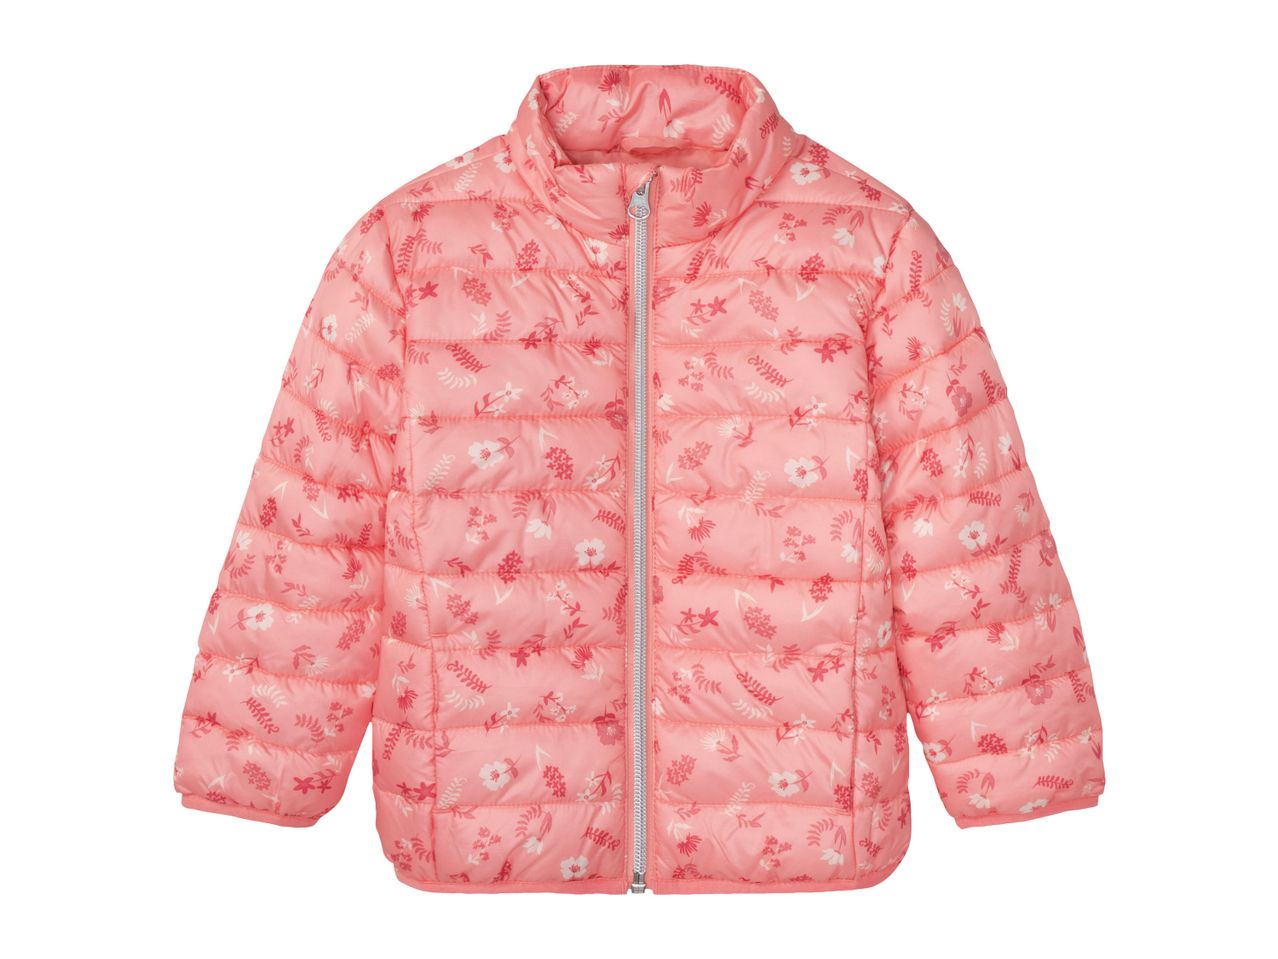 Go to full screen view: Girl’s Lightweight Jacket - Image 1